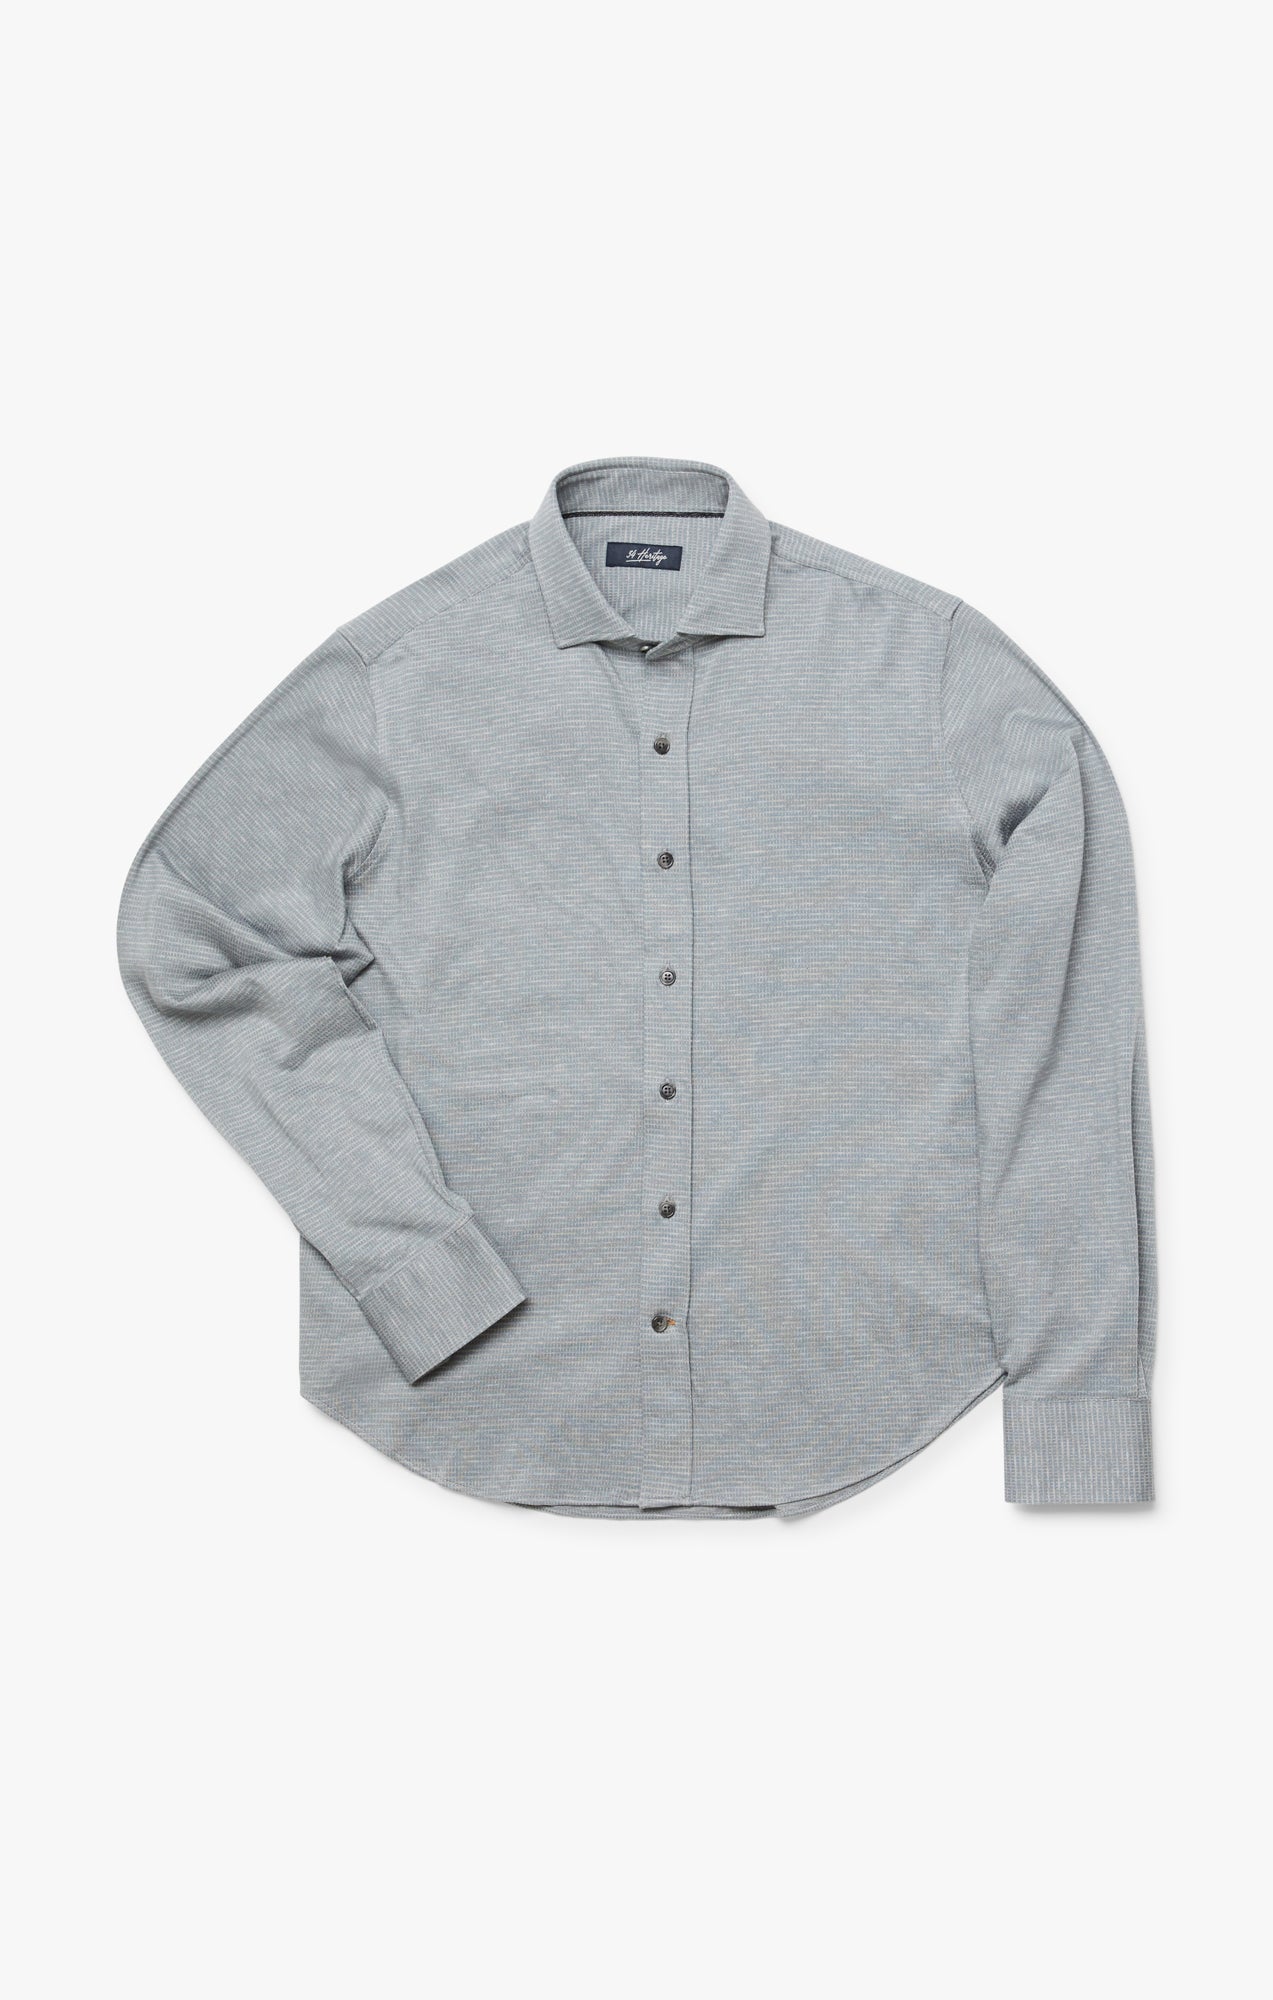 Structured Shirt In Light Grey Image 8